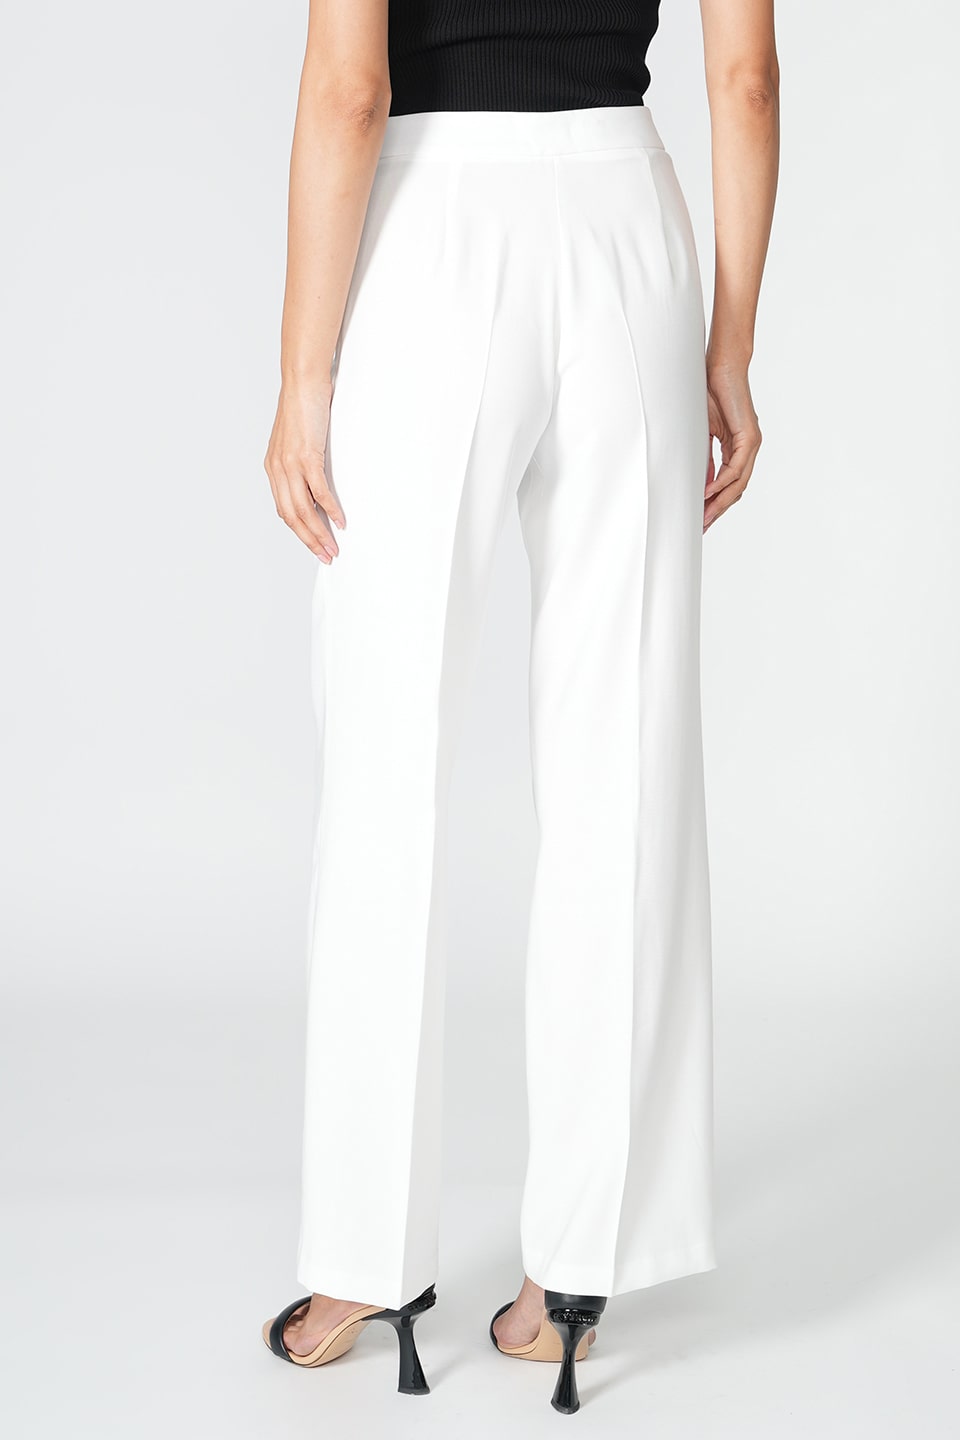 Designer White Women pants, shop online with free delivery in UAE. Product gallery 6